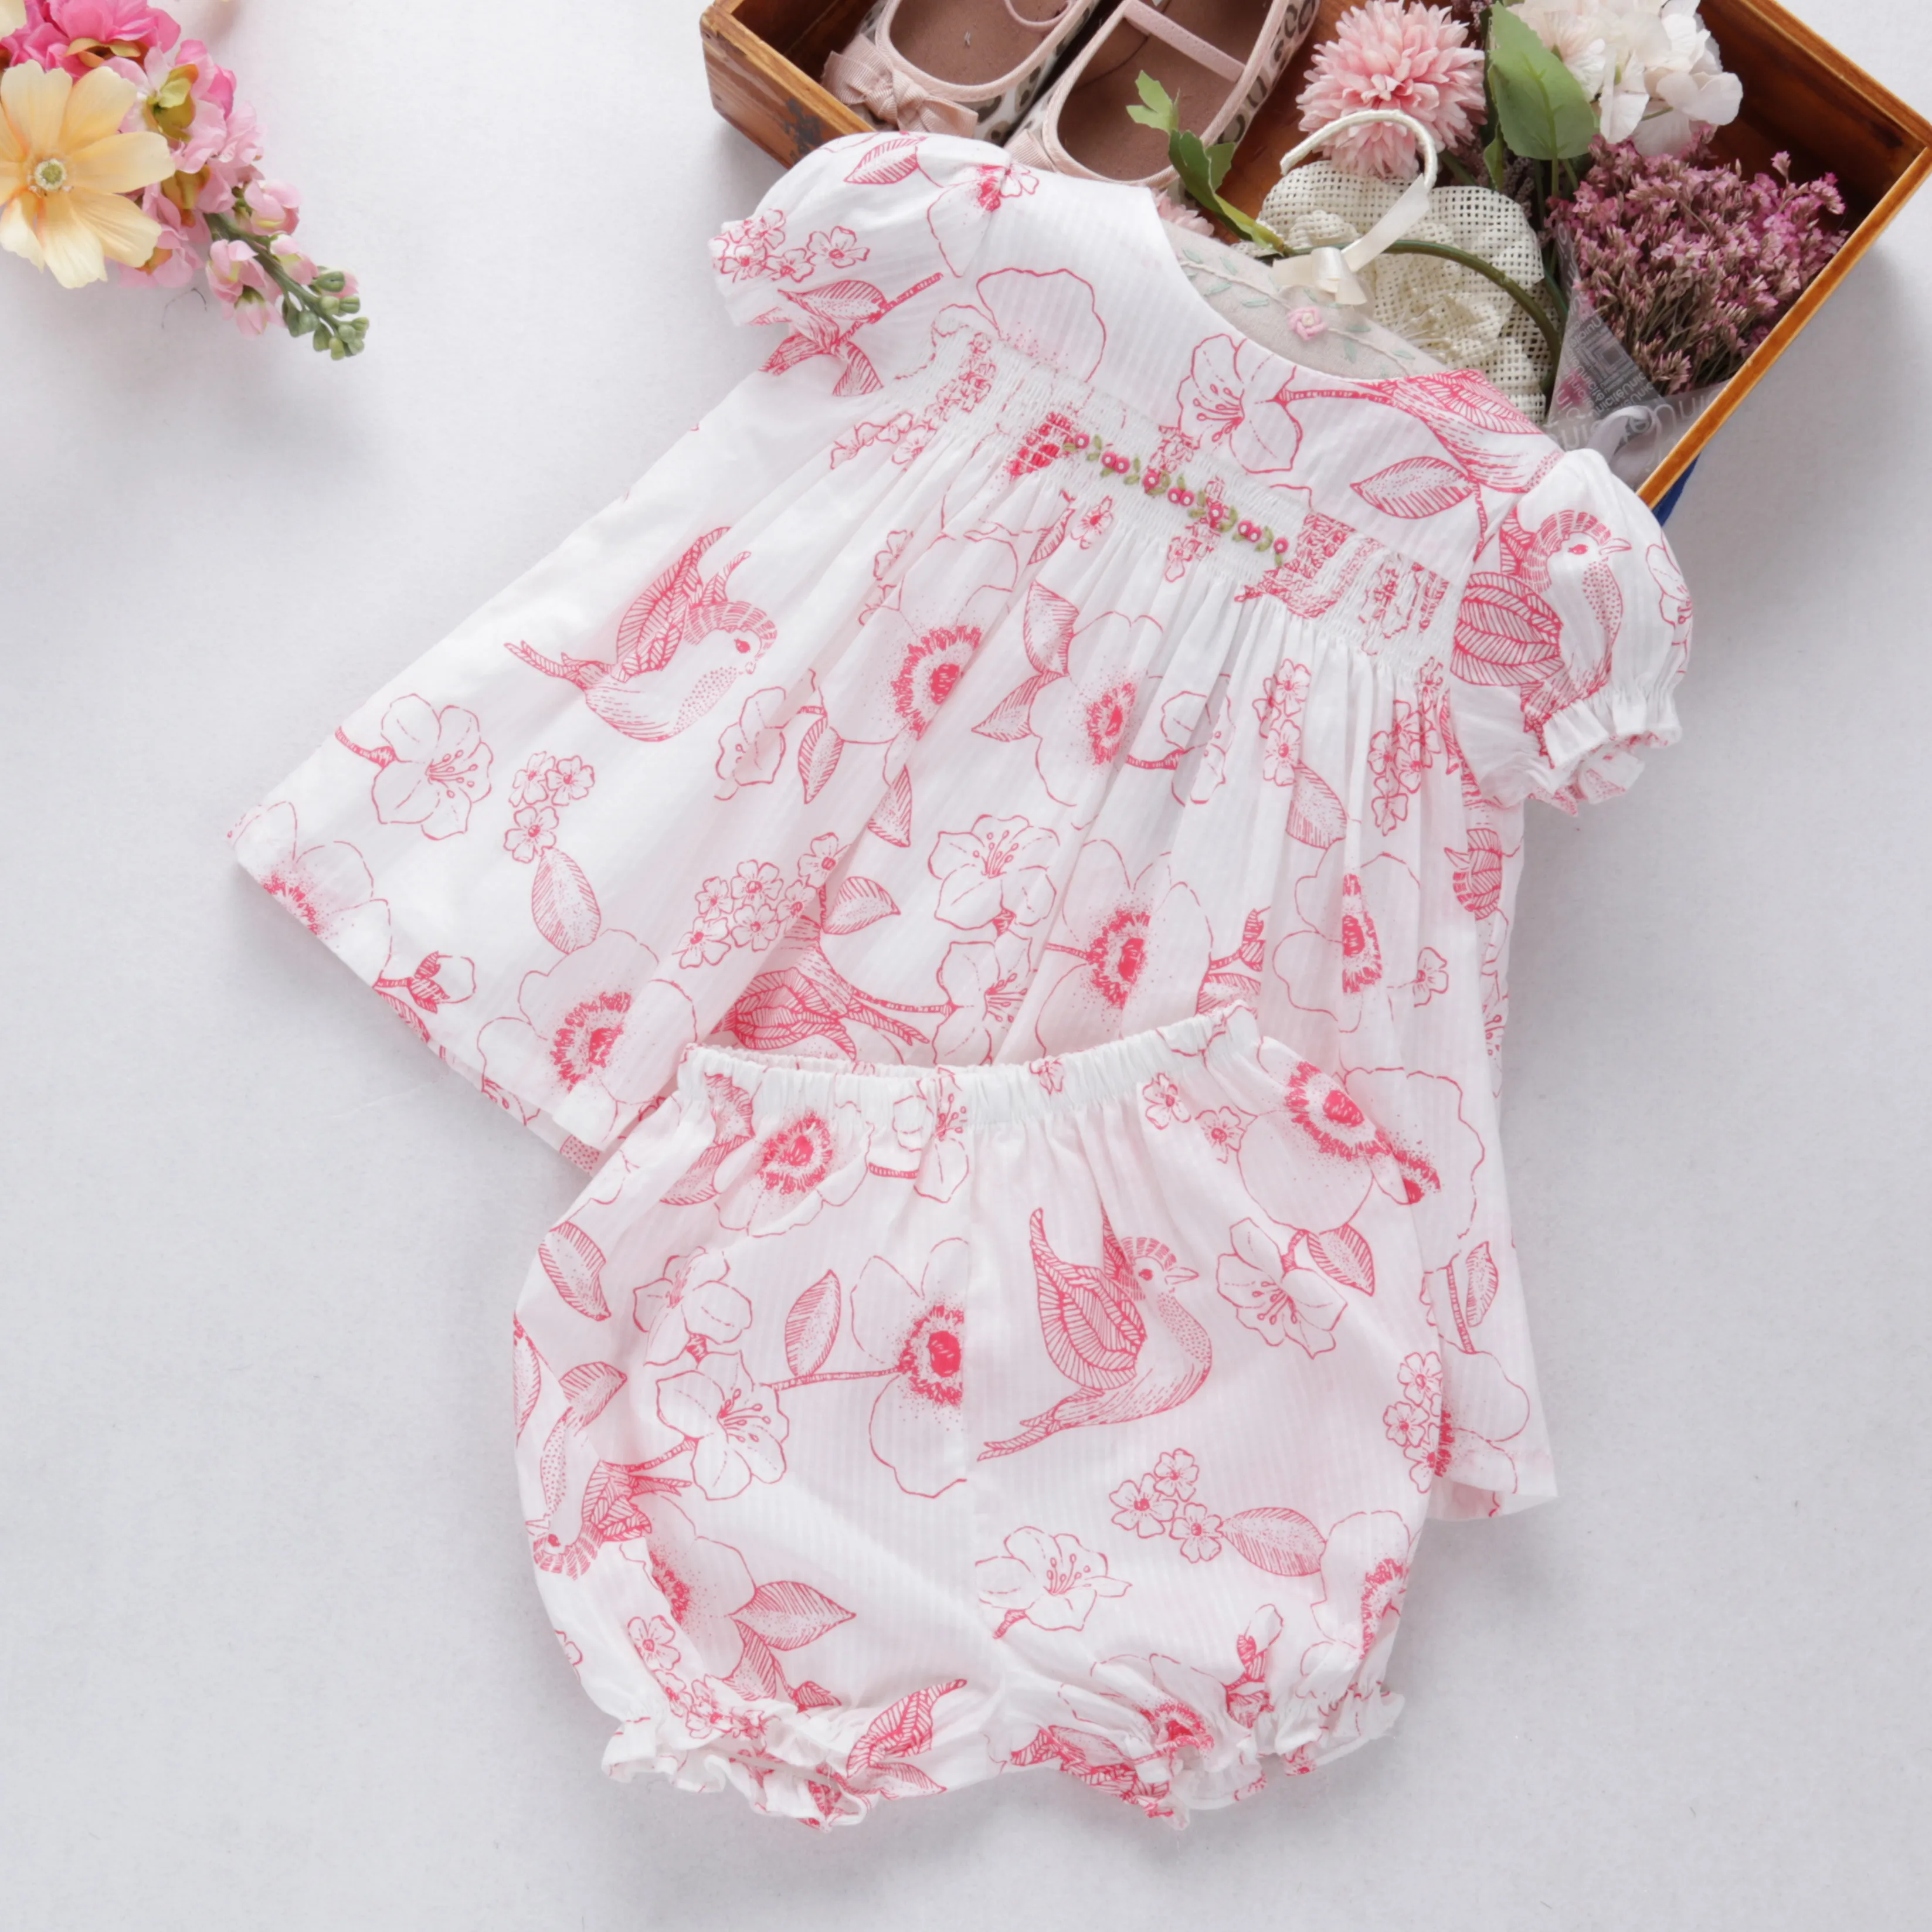 

B1998535 infant baby clothes sets summer smocked floral flower kids clothing boutiques children clothes wholesale, Picture shows